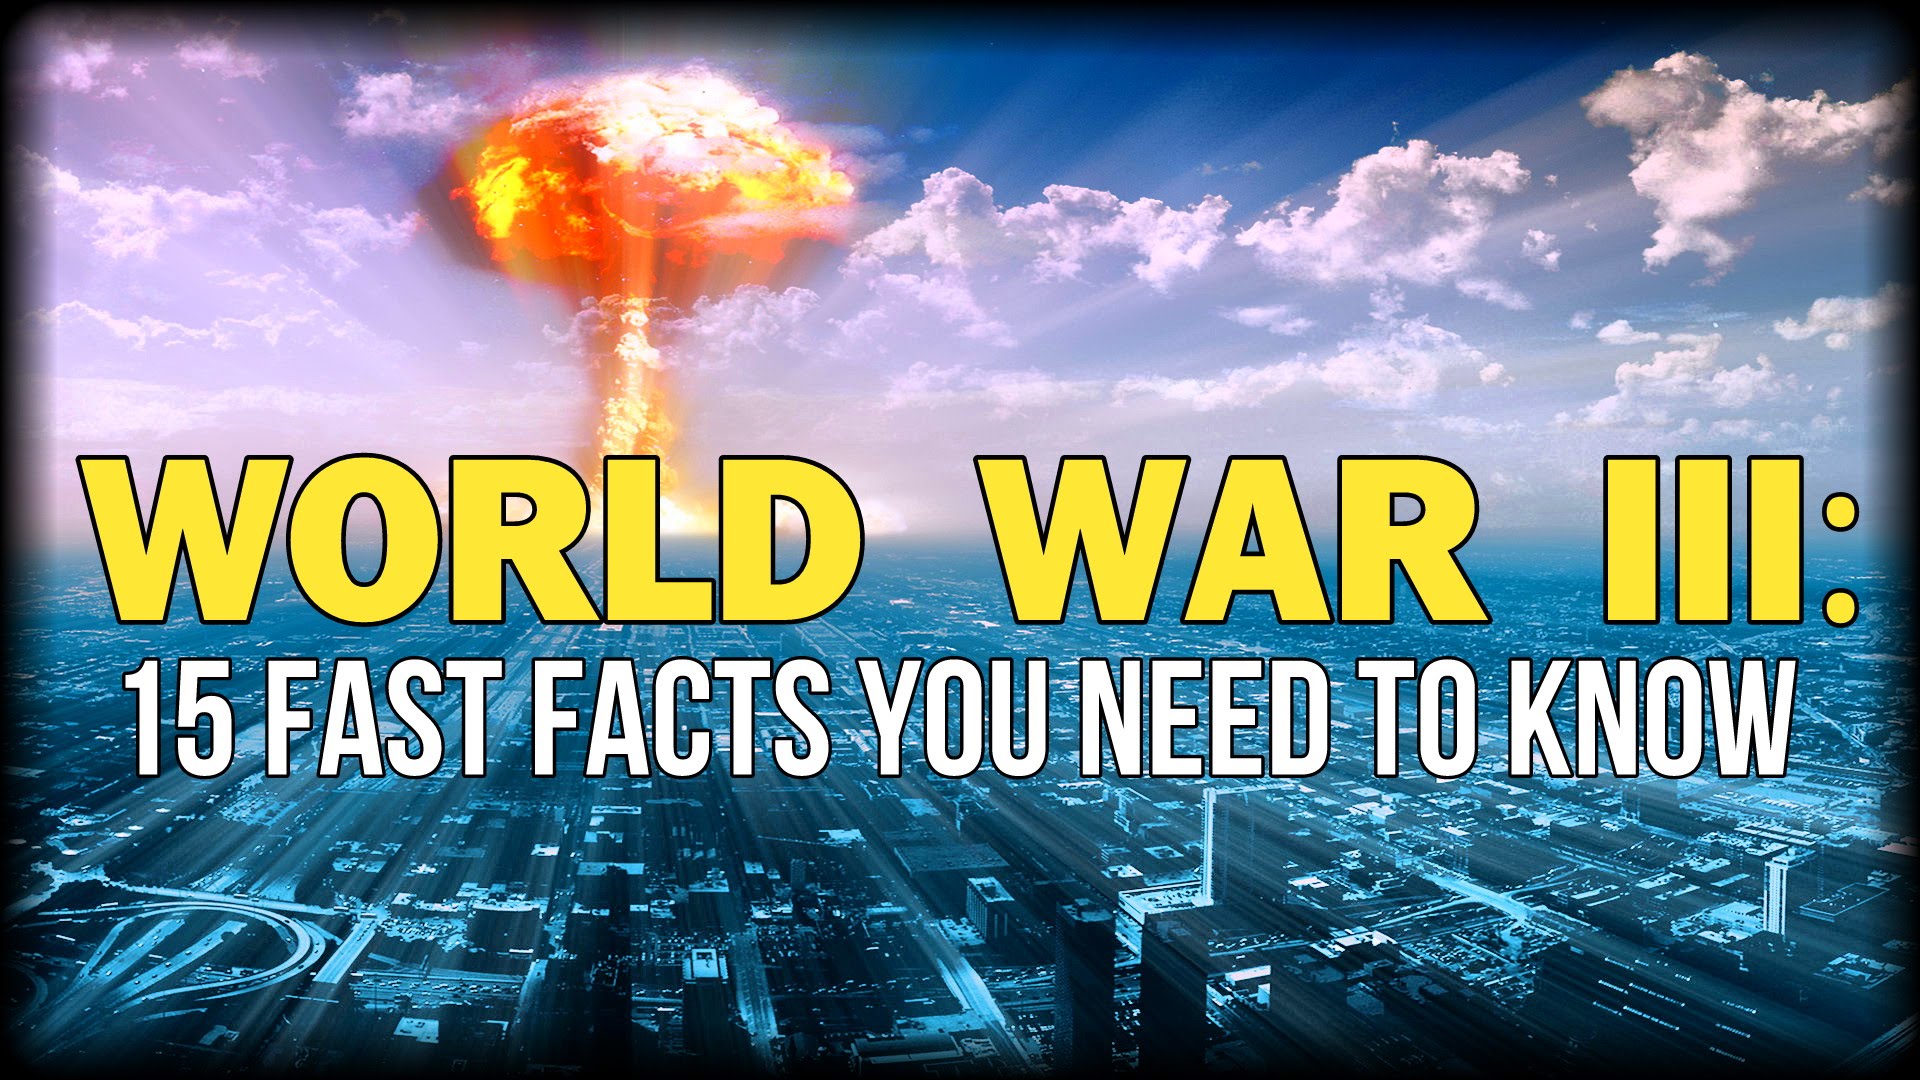 WORLD WAR III: 15 FAST FACTS YOU NEED TO KNOW